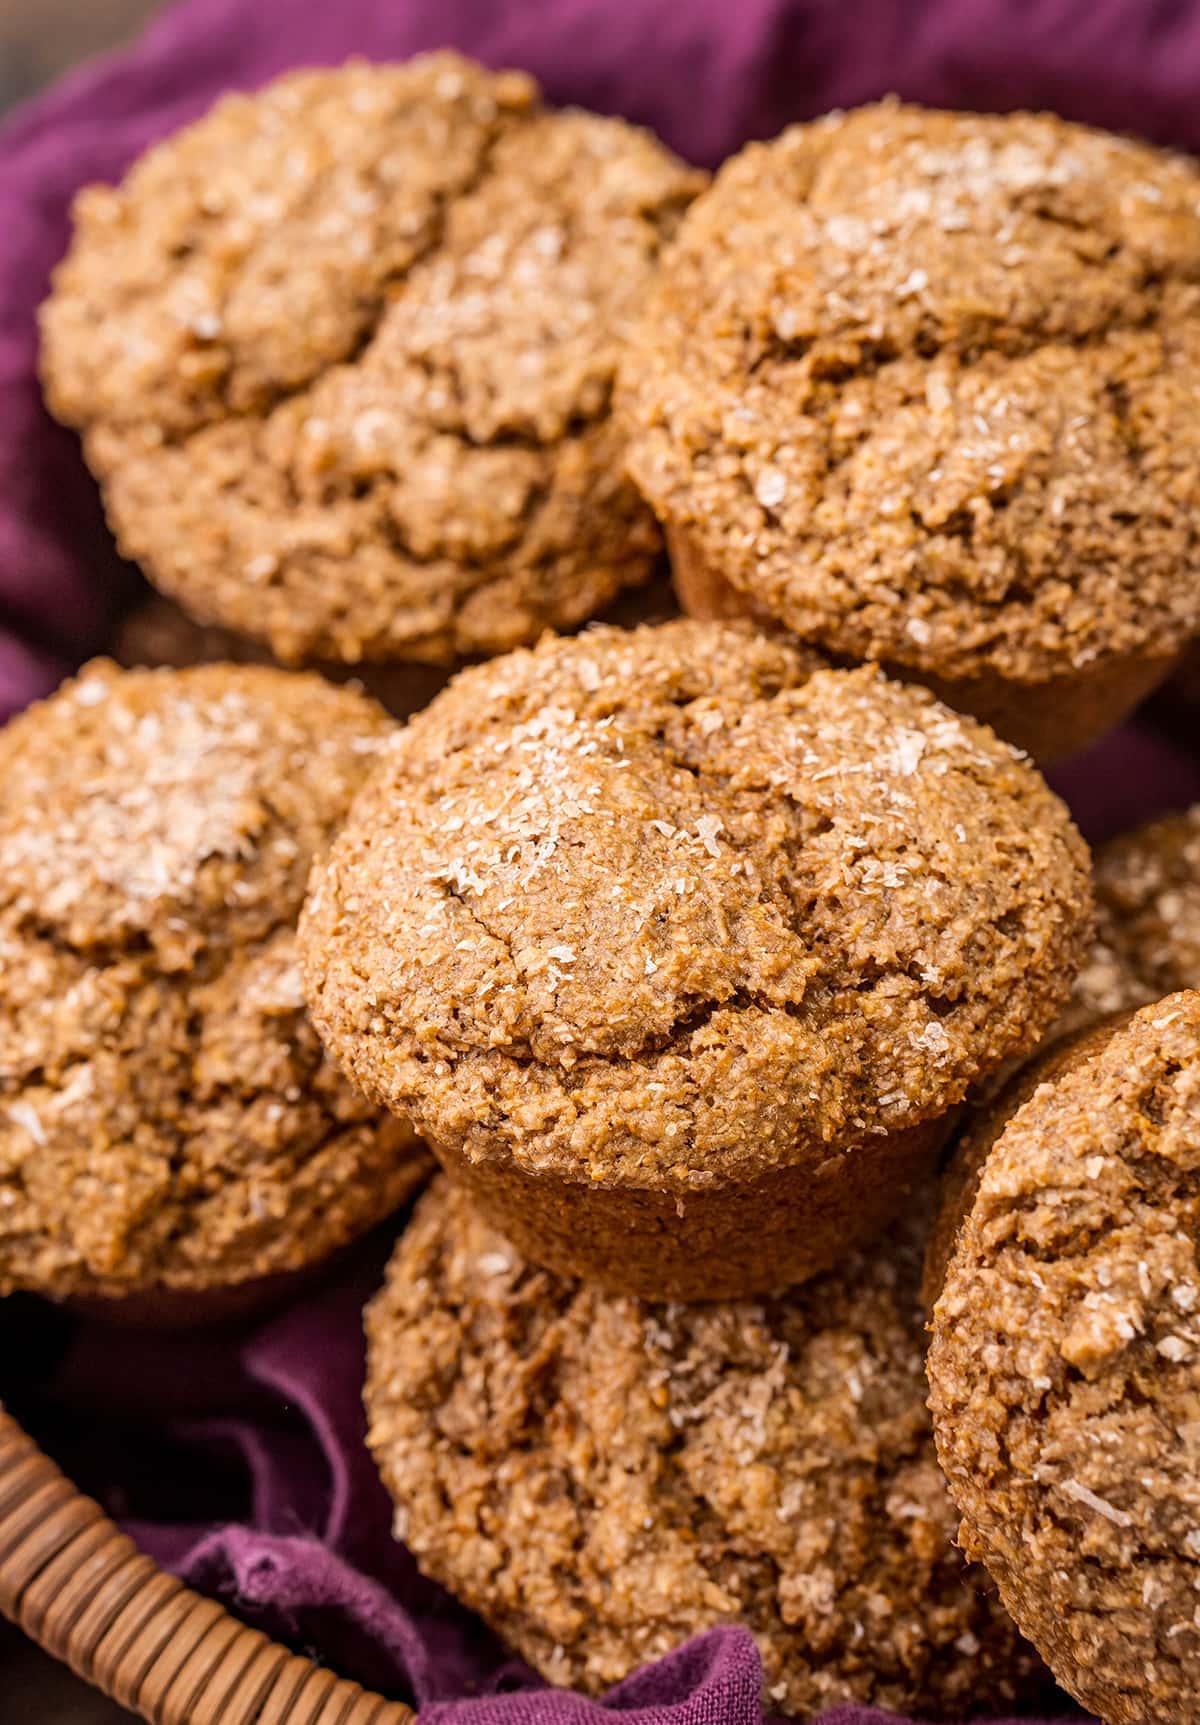 A pile of bran muffins in a basket lined with a purple cloth.